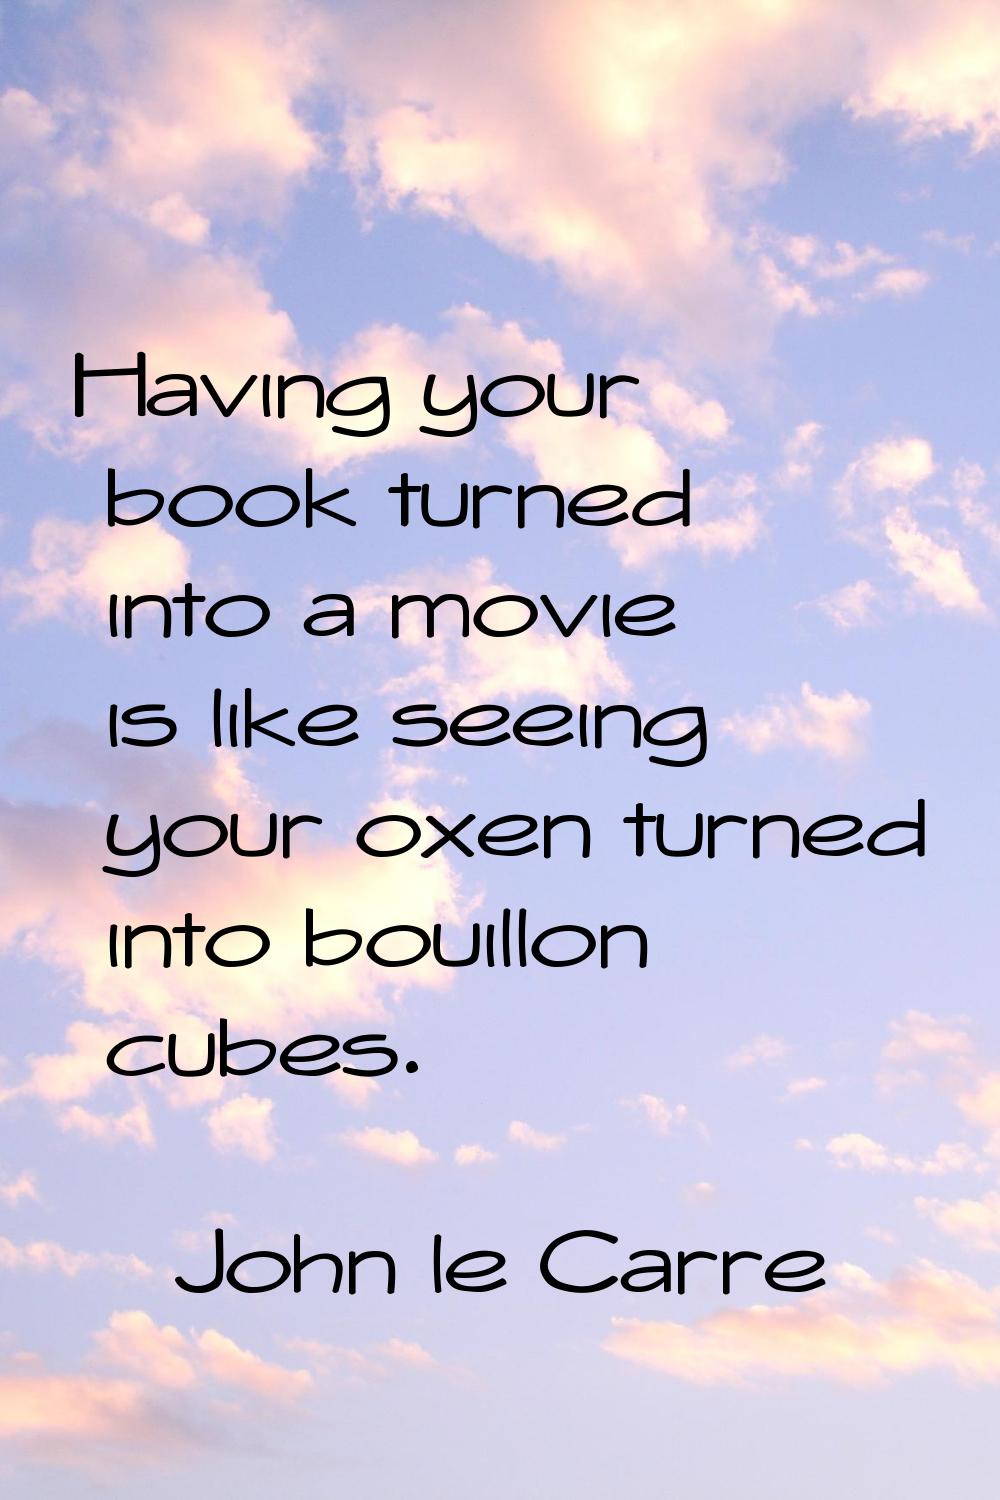 Having your book turned into a movie is like seeing your oxen turned into bouillon cubes.